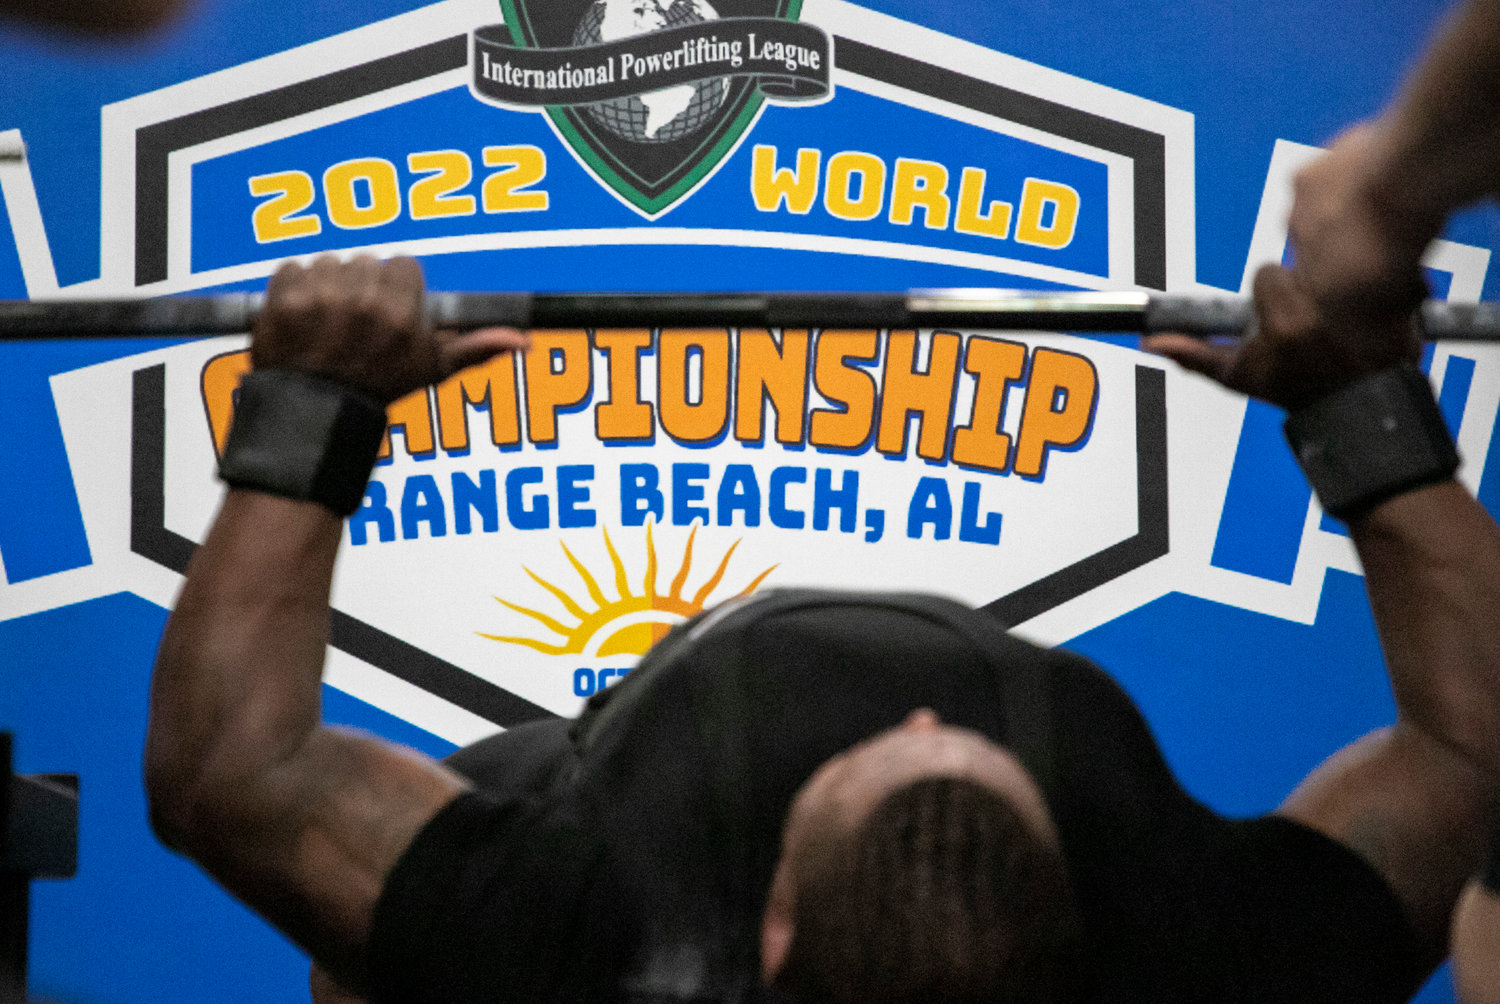 The Orange Beach Event Center was the new location of the International Powerlifting League’s World Championship meet after it was originally slated to be held in Russia. Last weekend, the top lifters represented their countries on the Alabama Gulf Coast in the squat, bench press and deadlift.